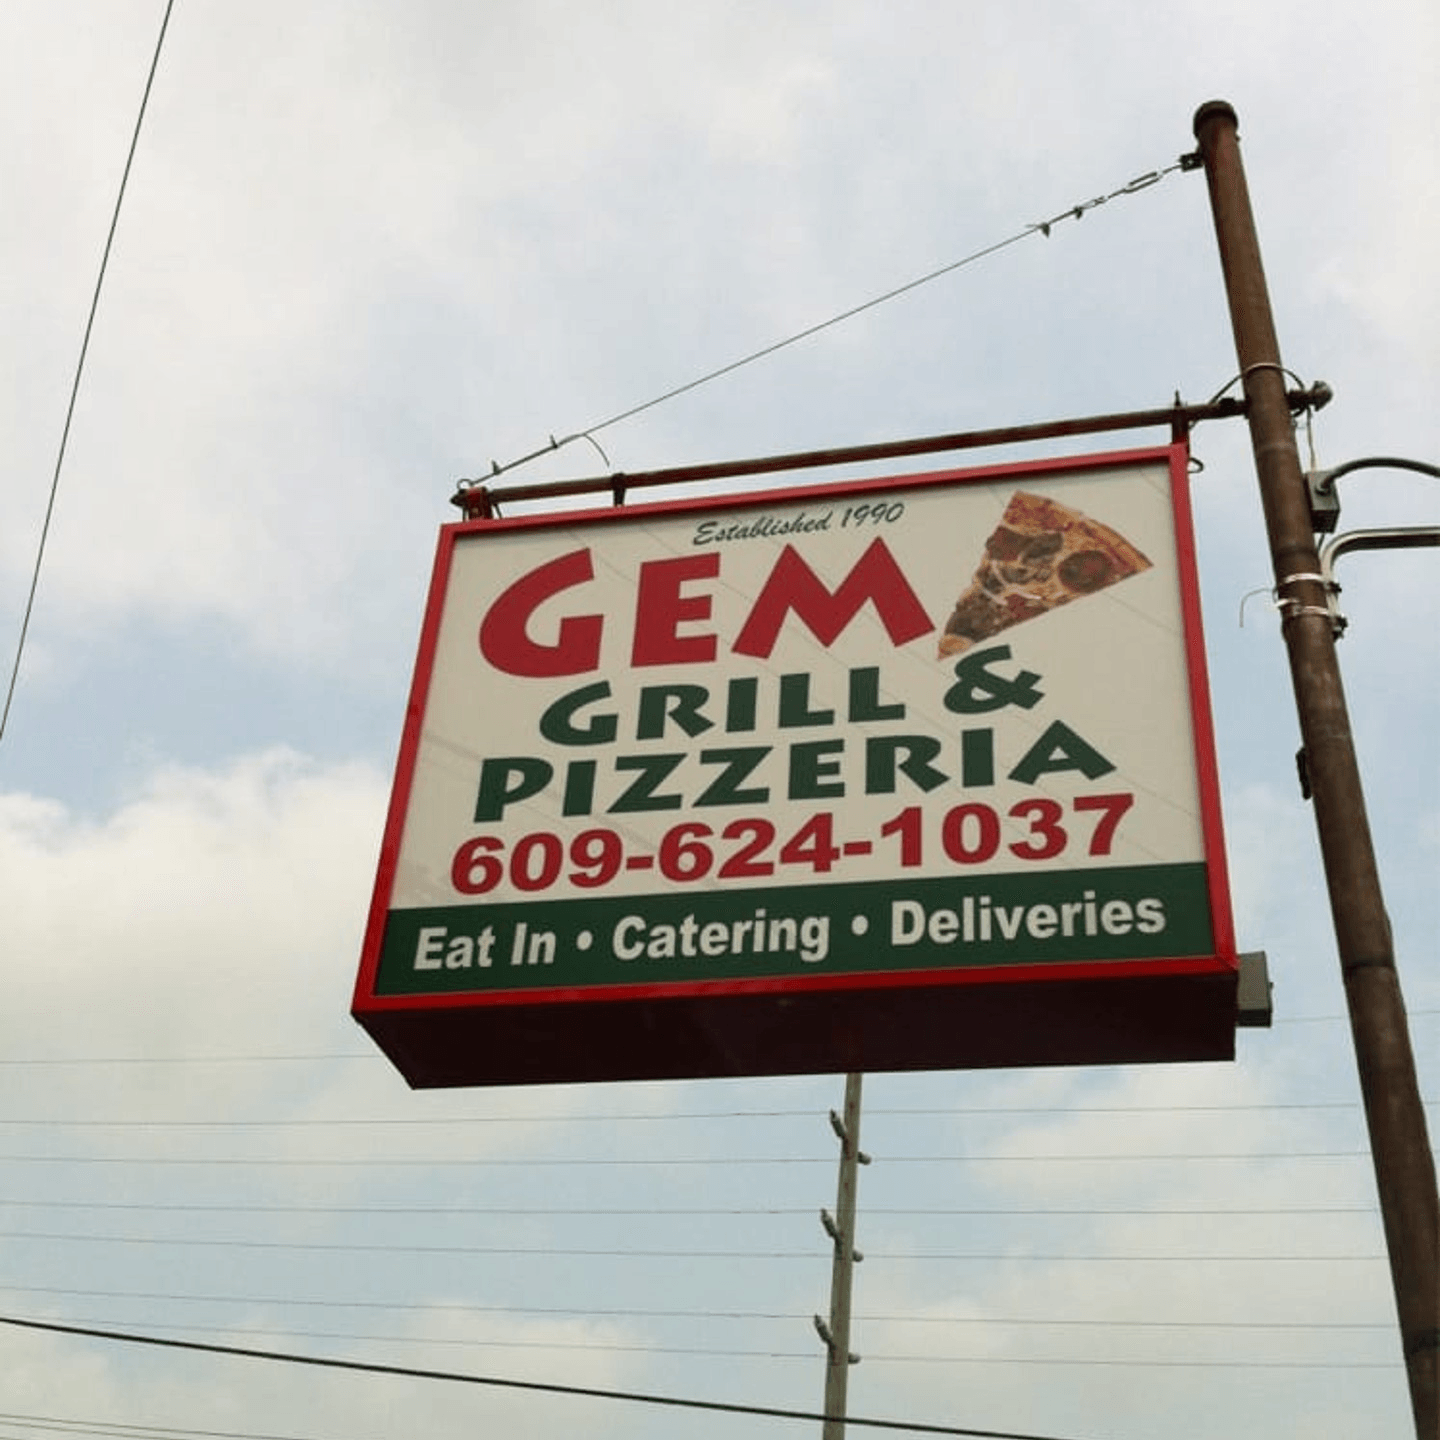 Welcome to Gem Grill & Pizzeria!